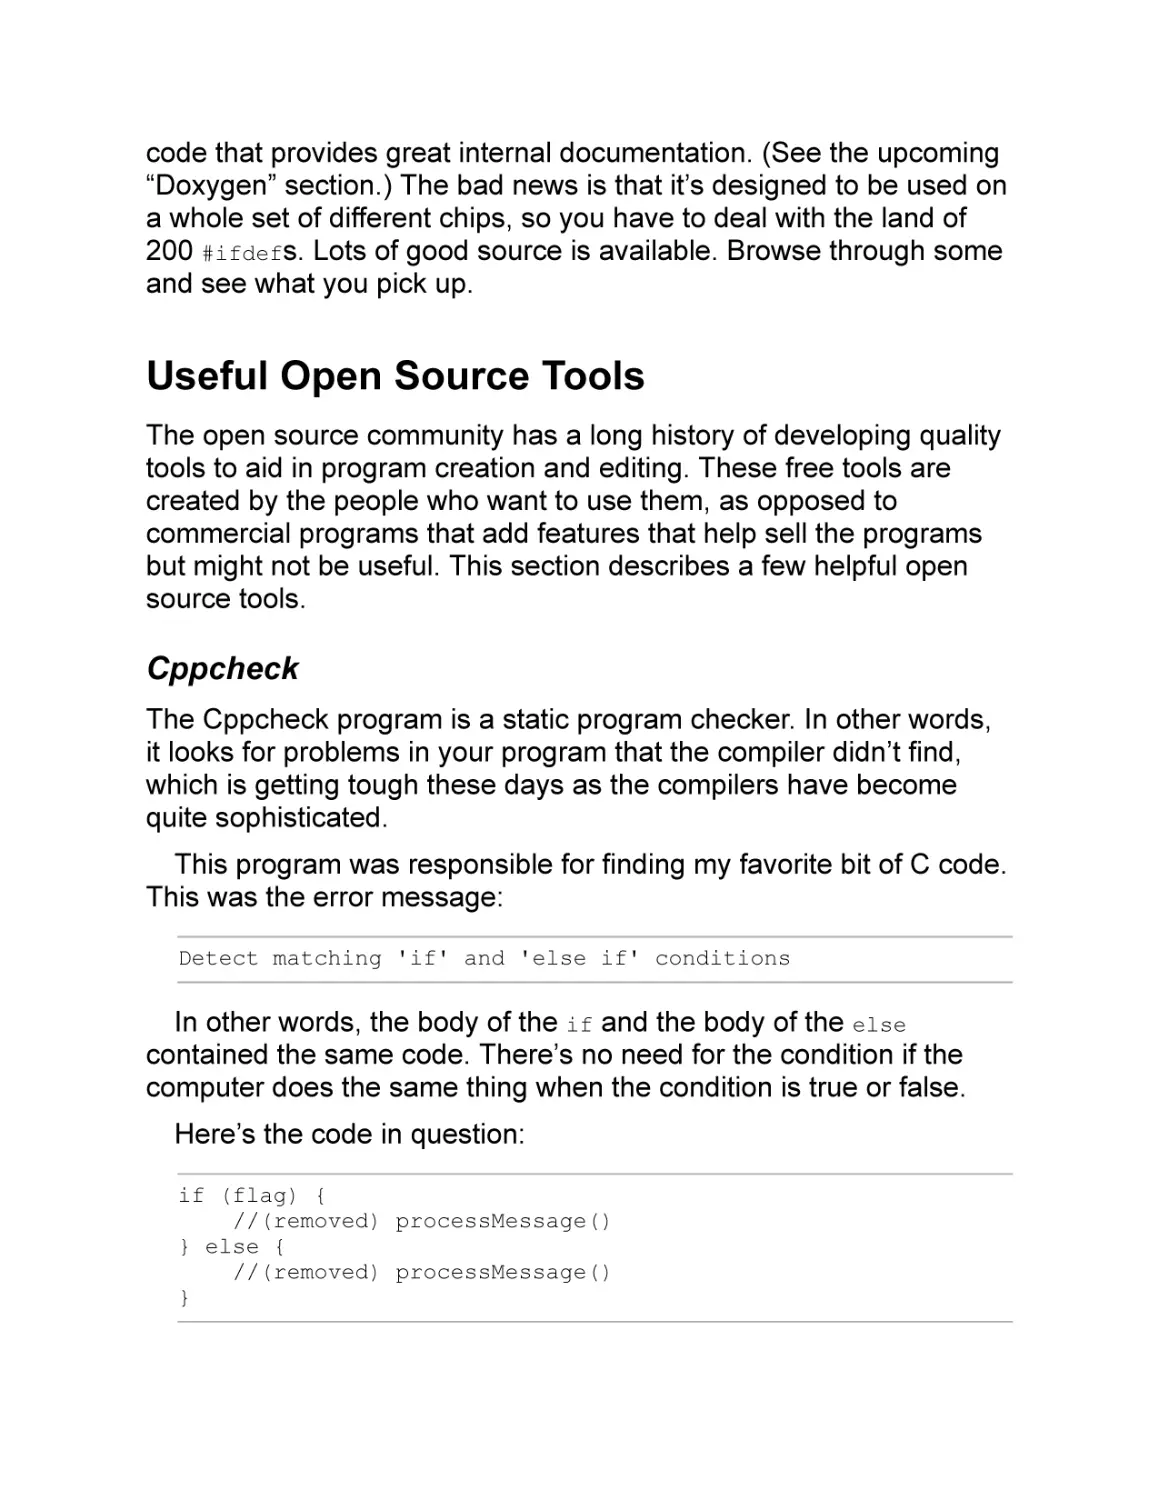 Useful Open Source Tools
Cppcheck